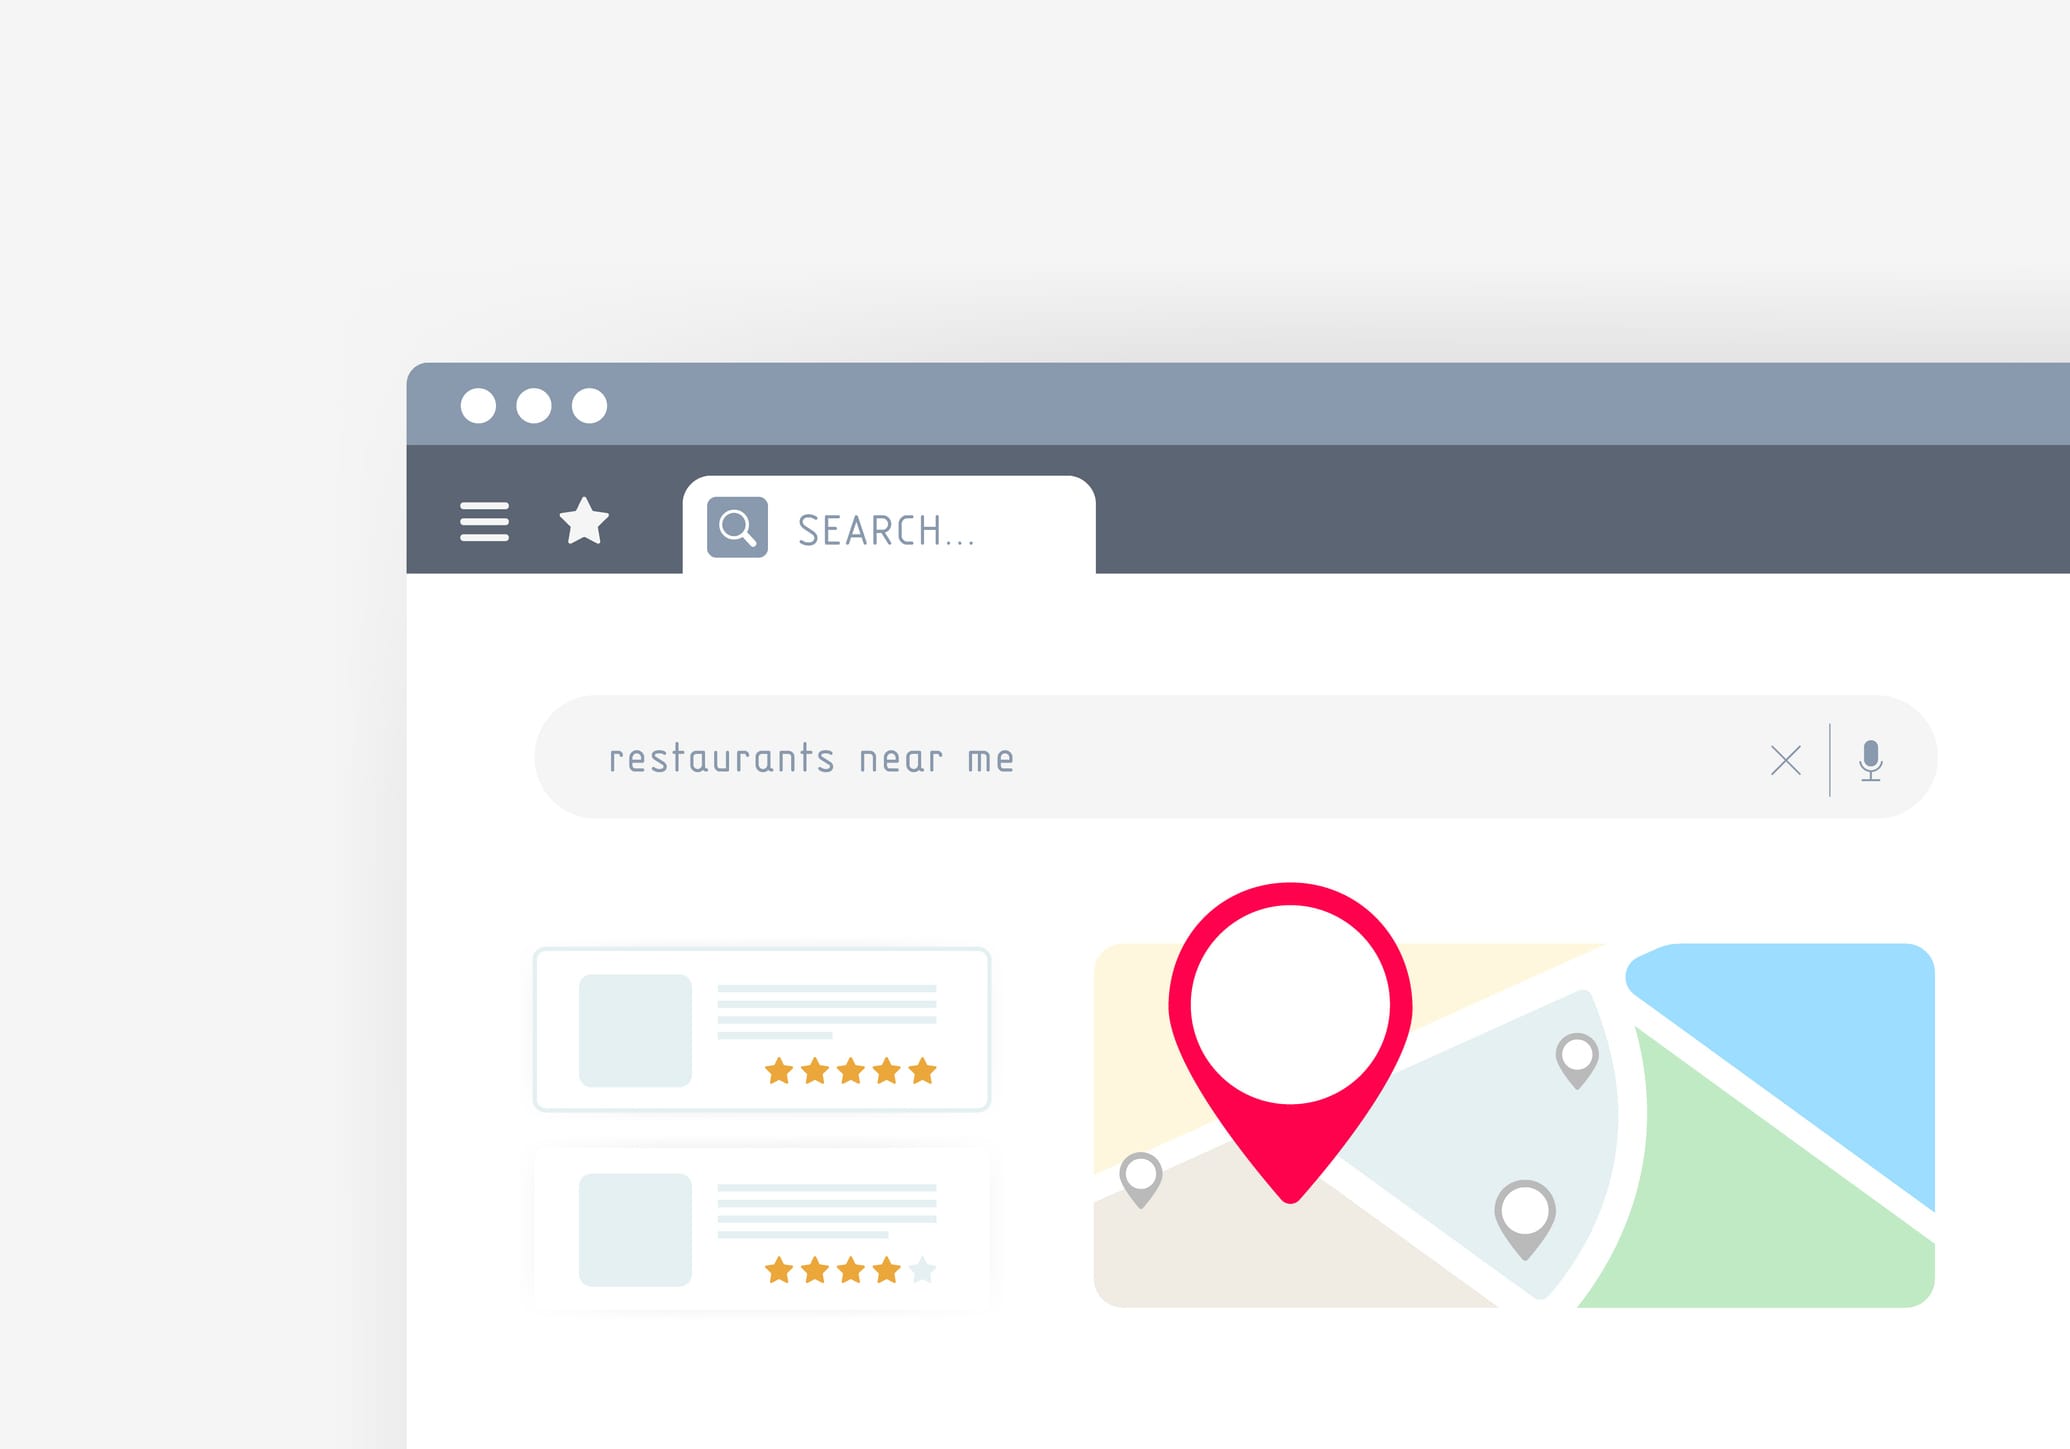 Near Me Search - local seo marketing strategy based on consumer searches for services nearby. Browser with search result and map of nearby places with descriptions and ratings.